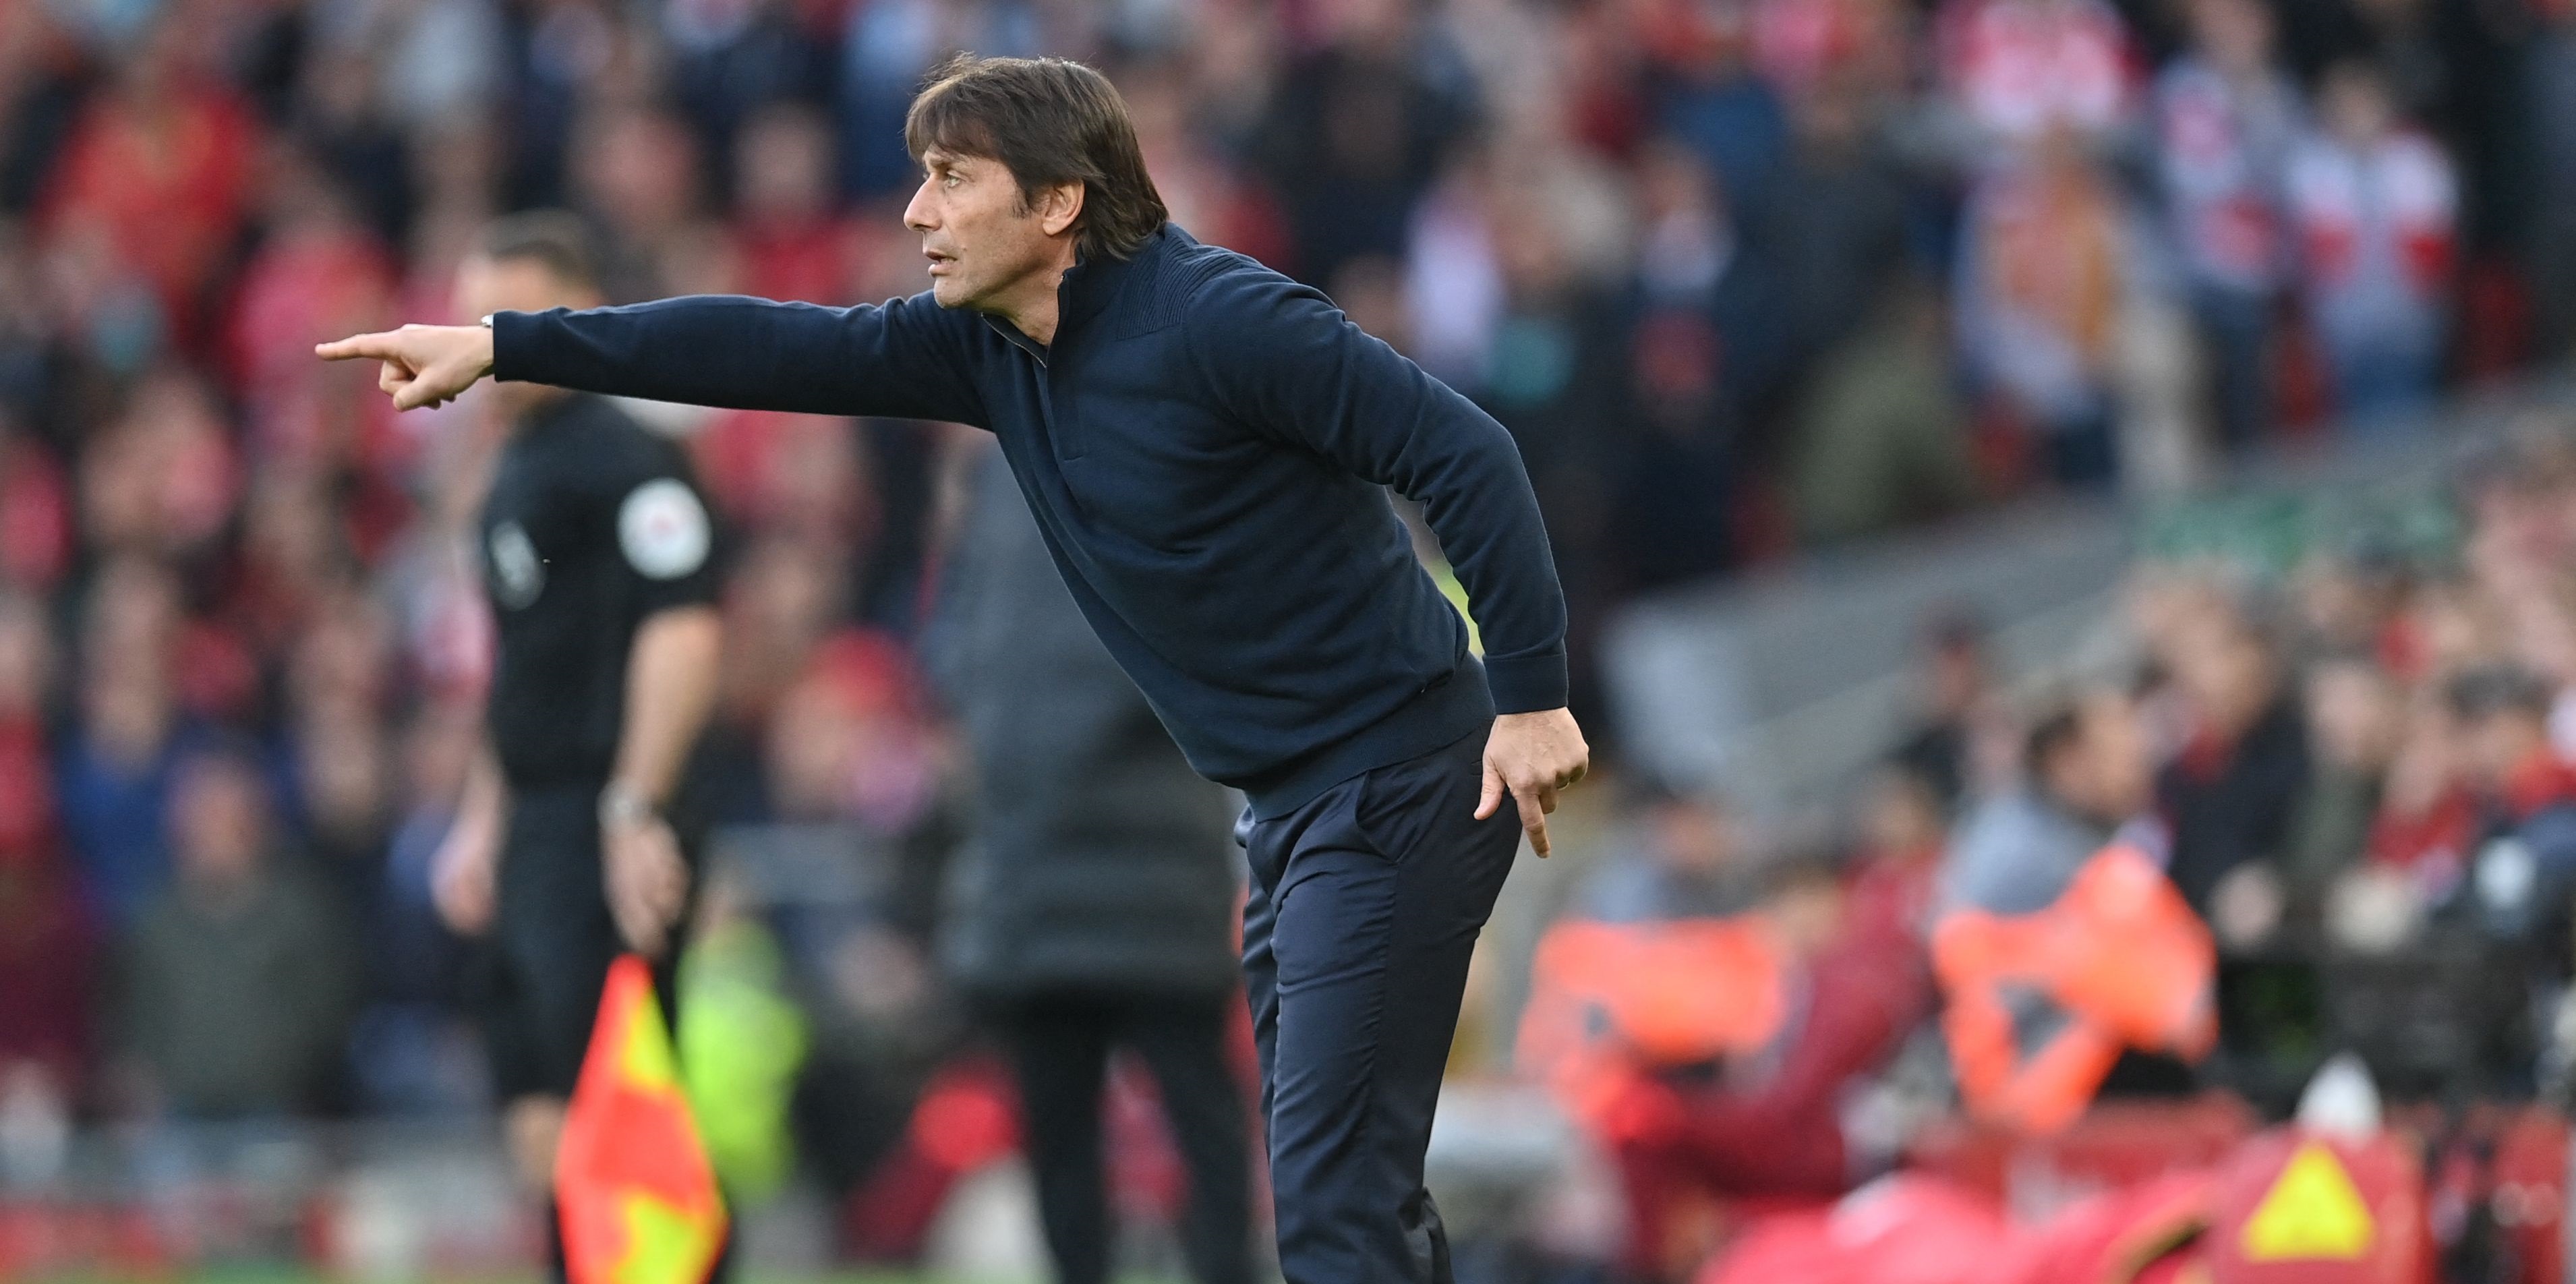 BBC pundit says ‘Liverpool struggled’ to handle one Conte trick in frustrating draw v Tottenham